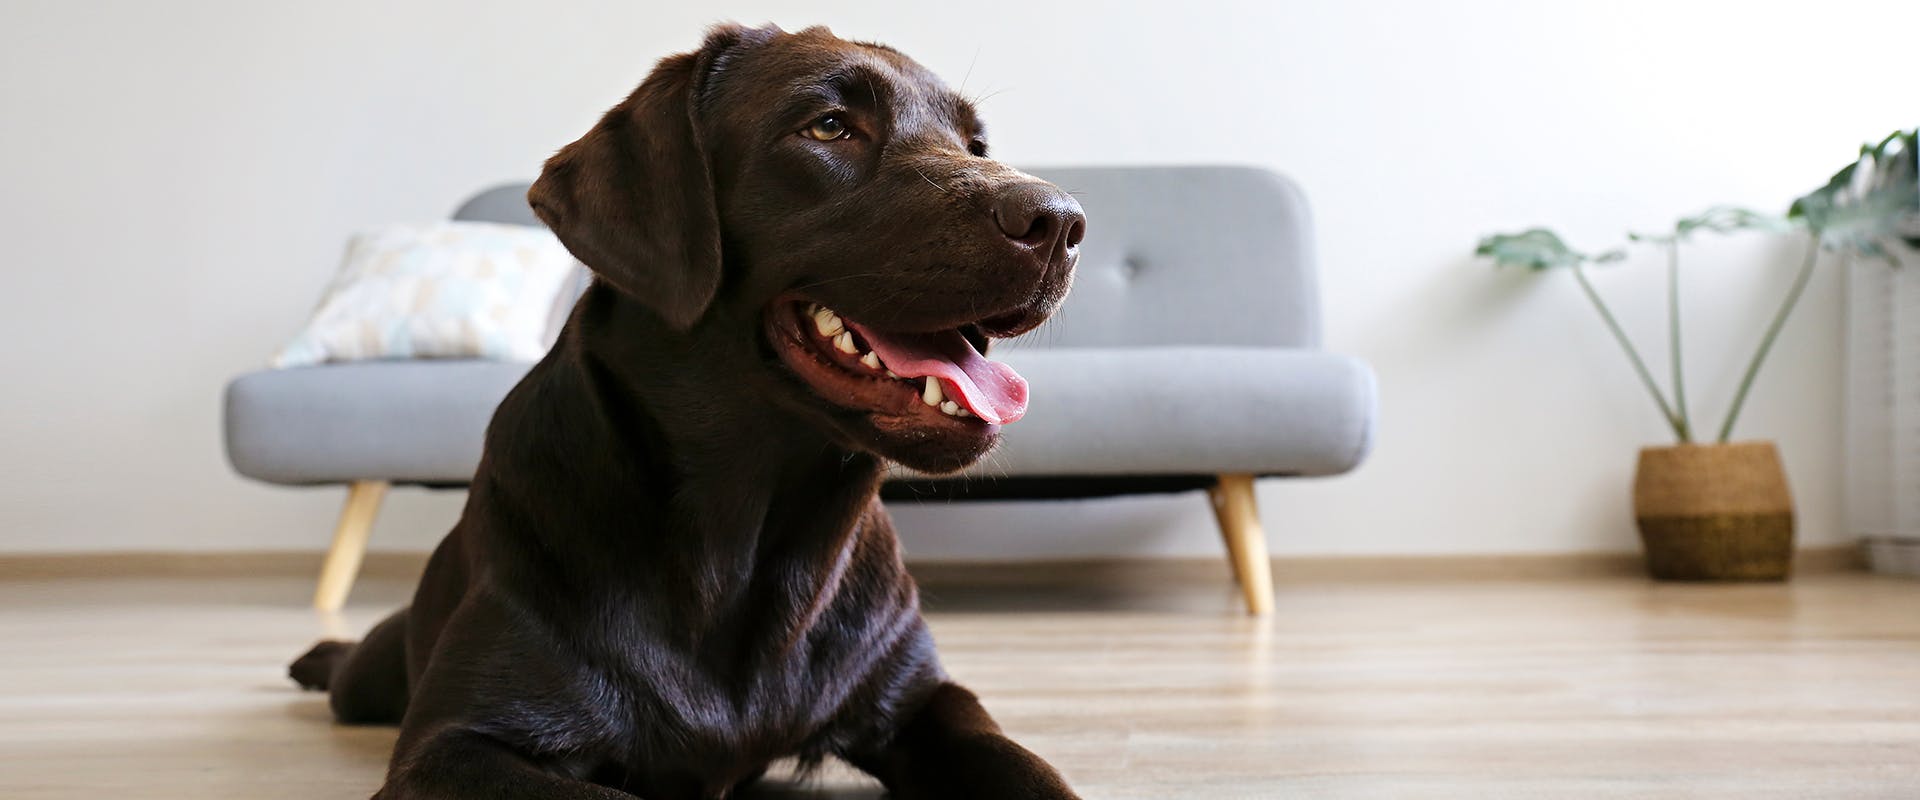 A chocolate Labrador sitting on a hardwood floor, inside a tidy and modern apartment